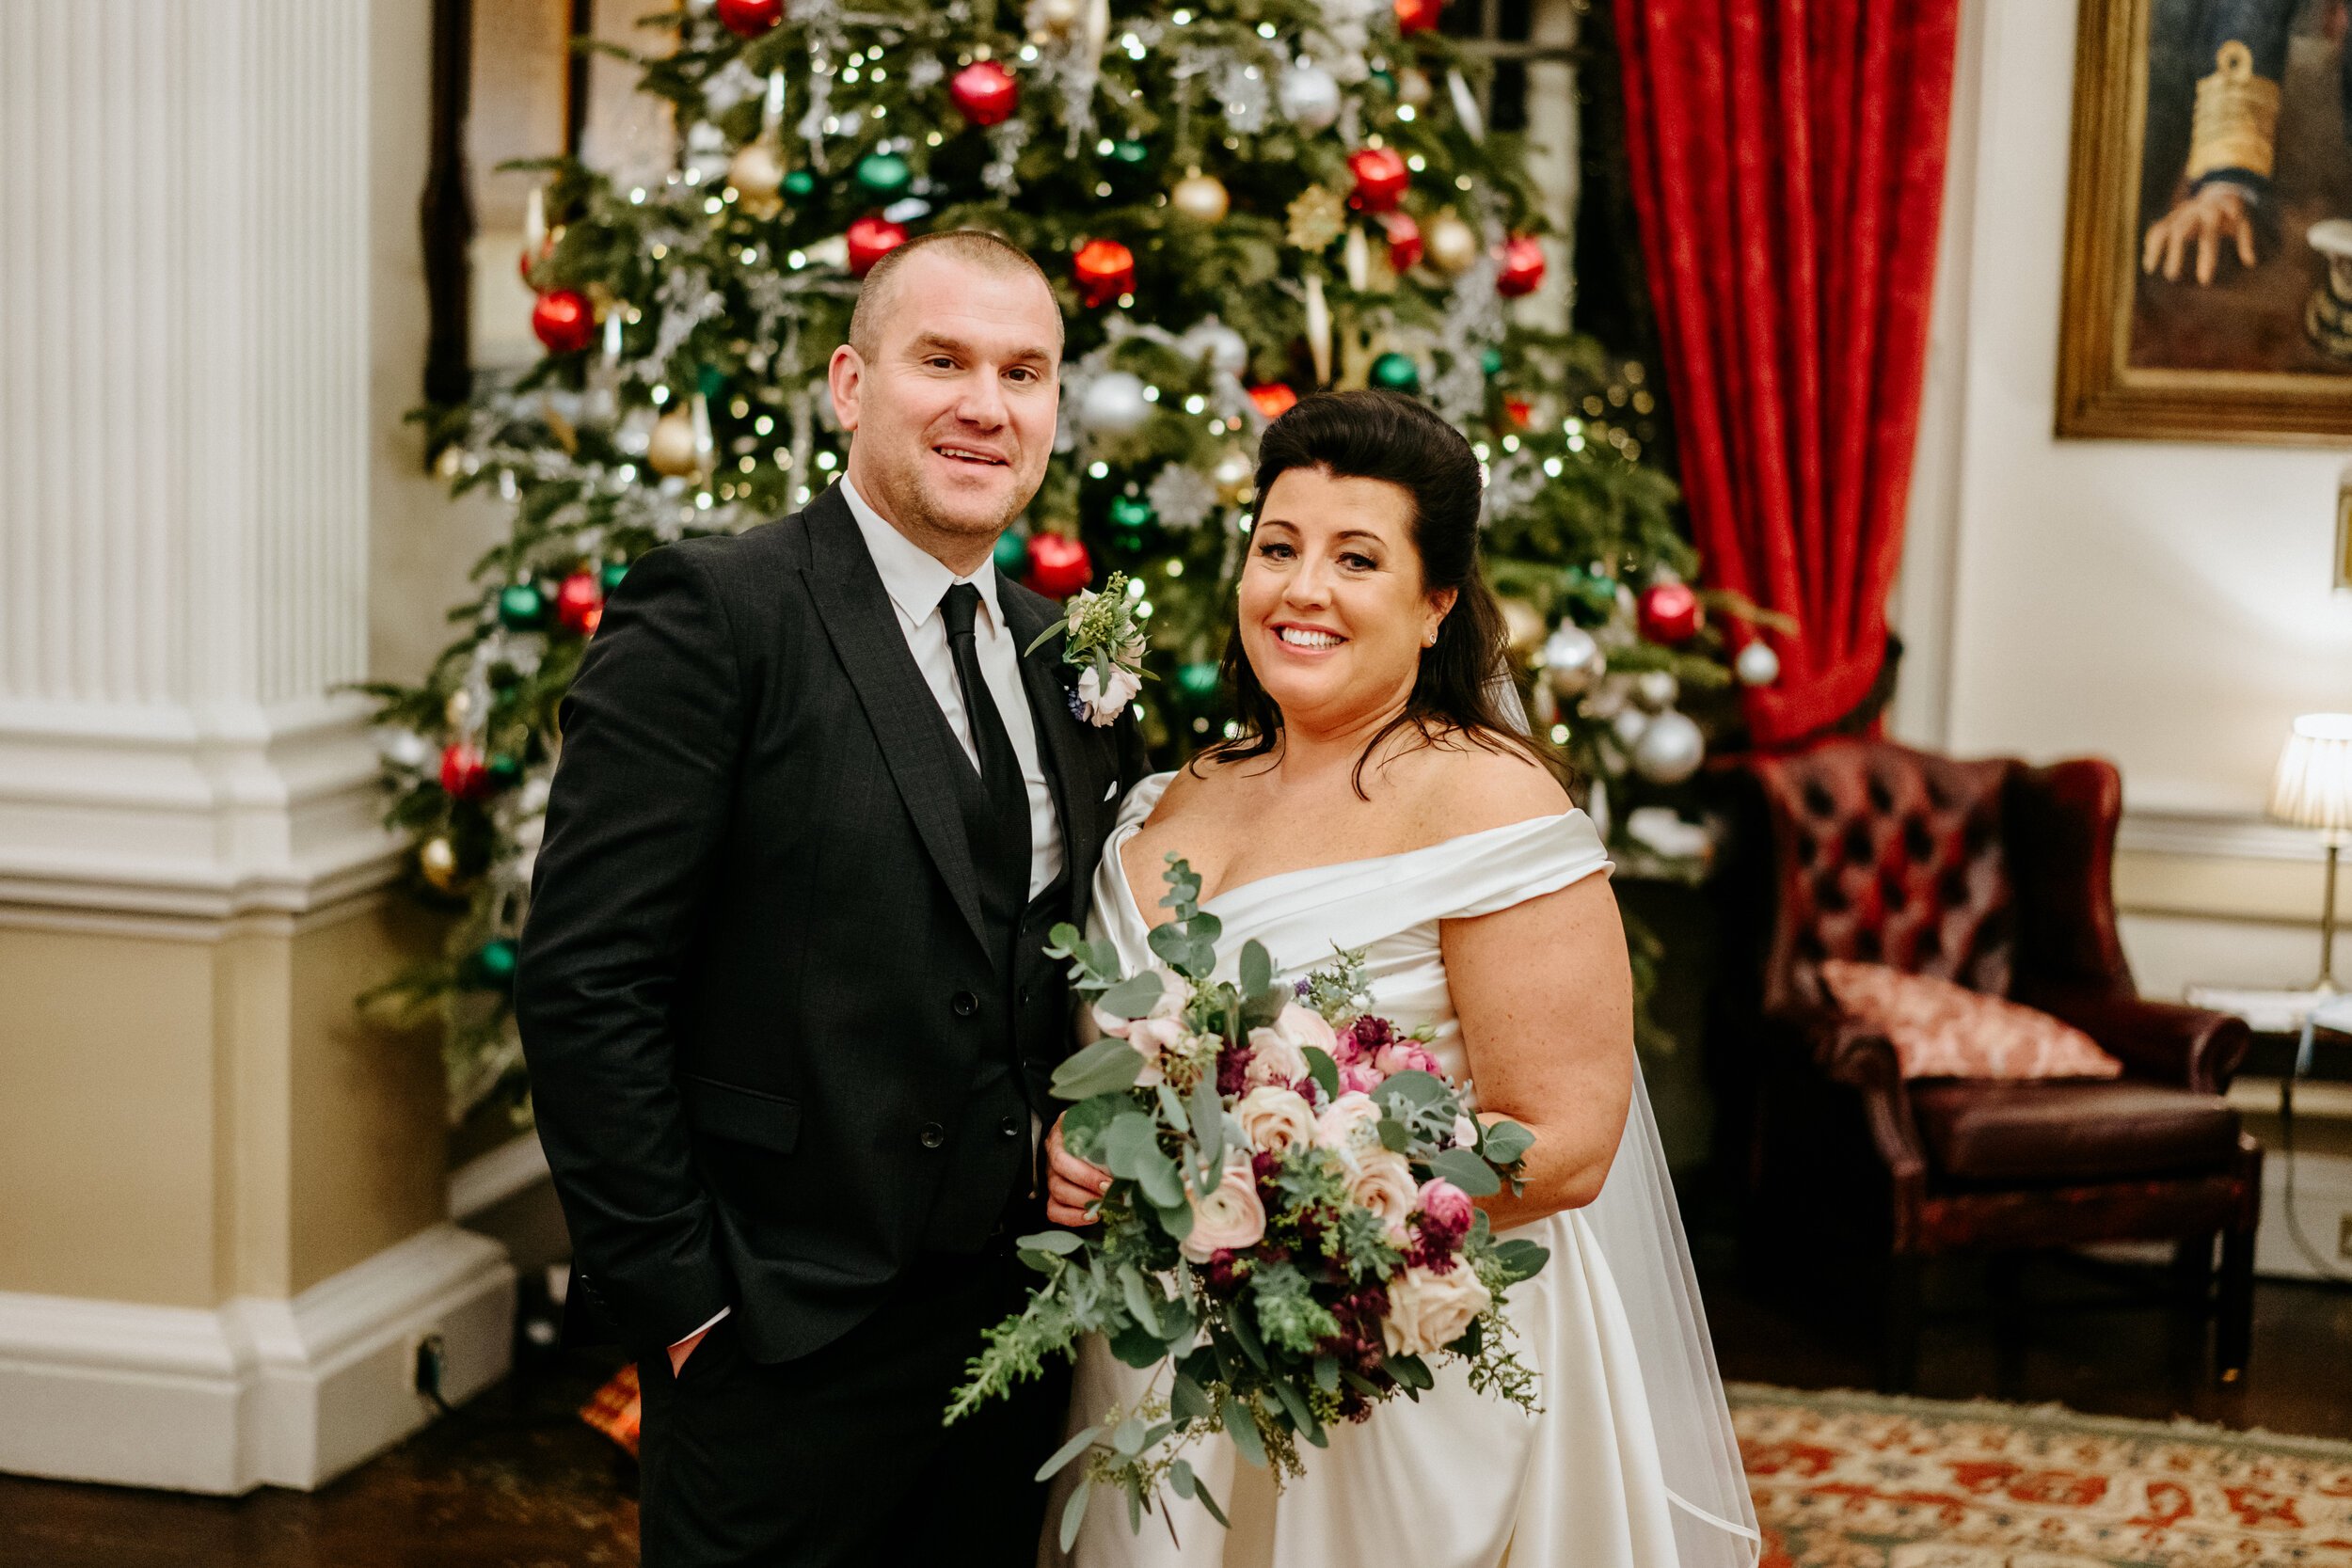 Beautiful bride Louise wore a wedding dress by Halfpenny London